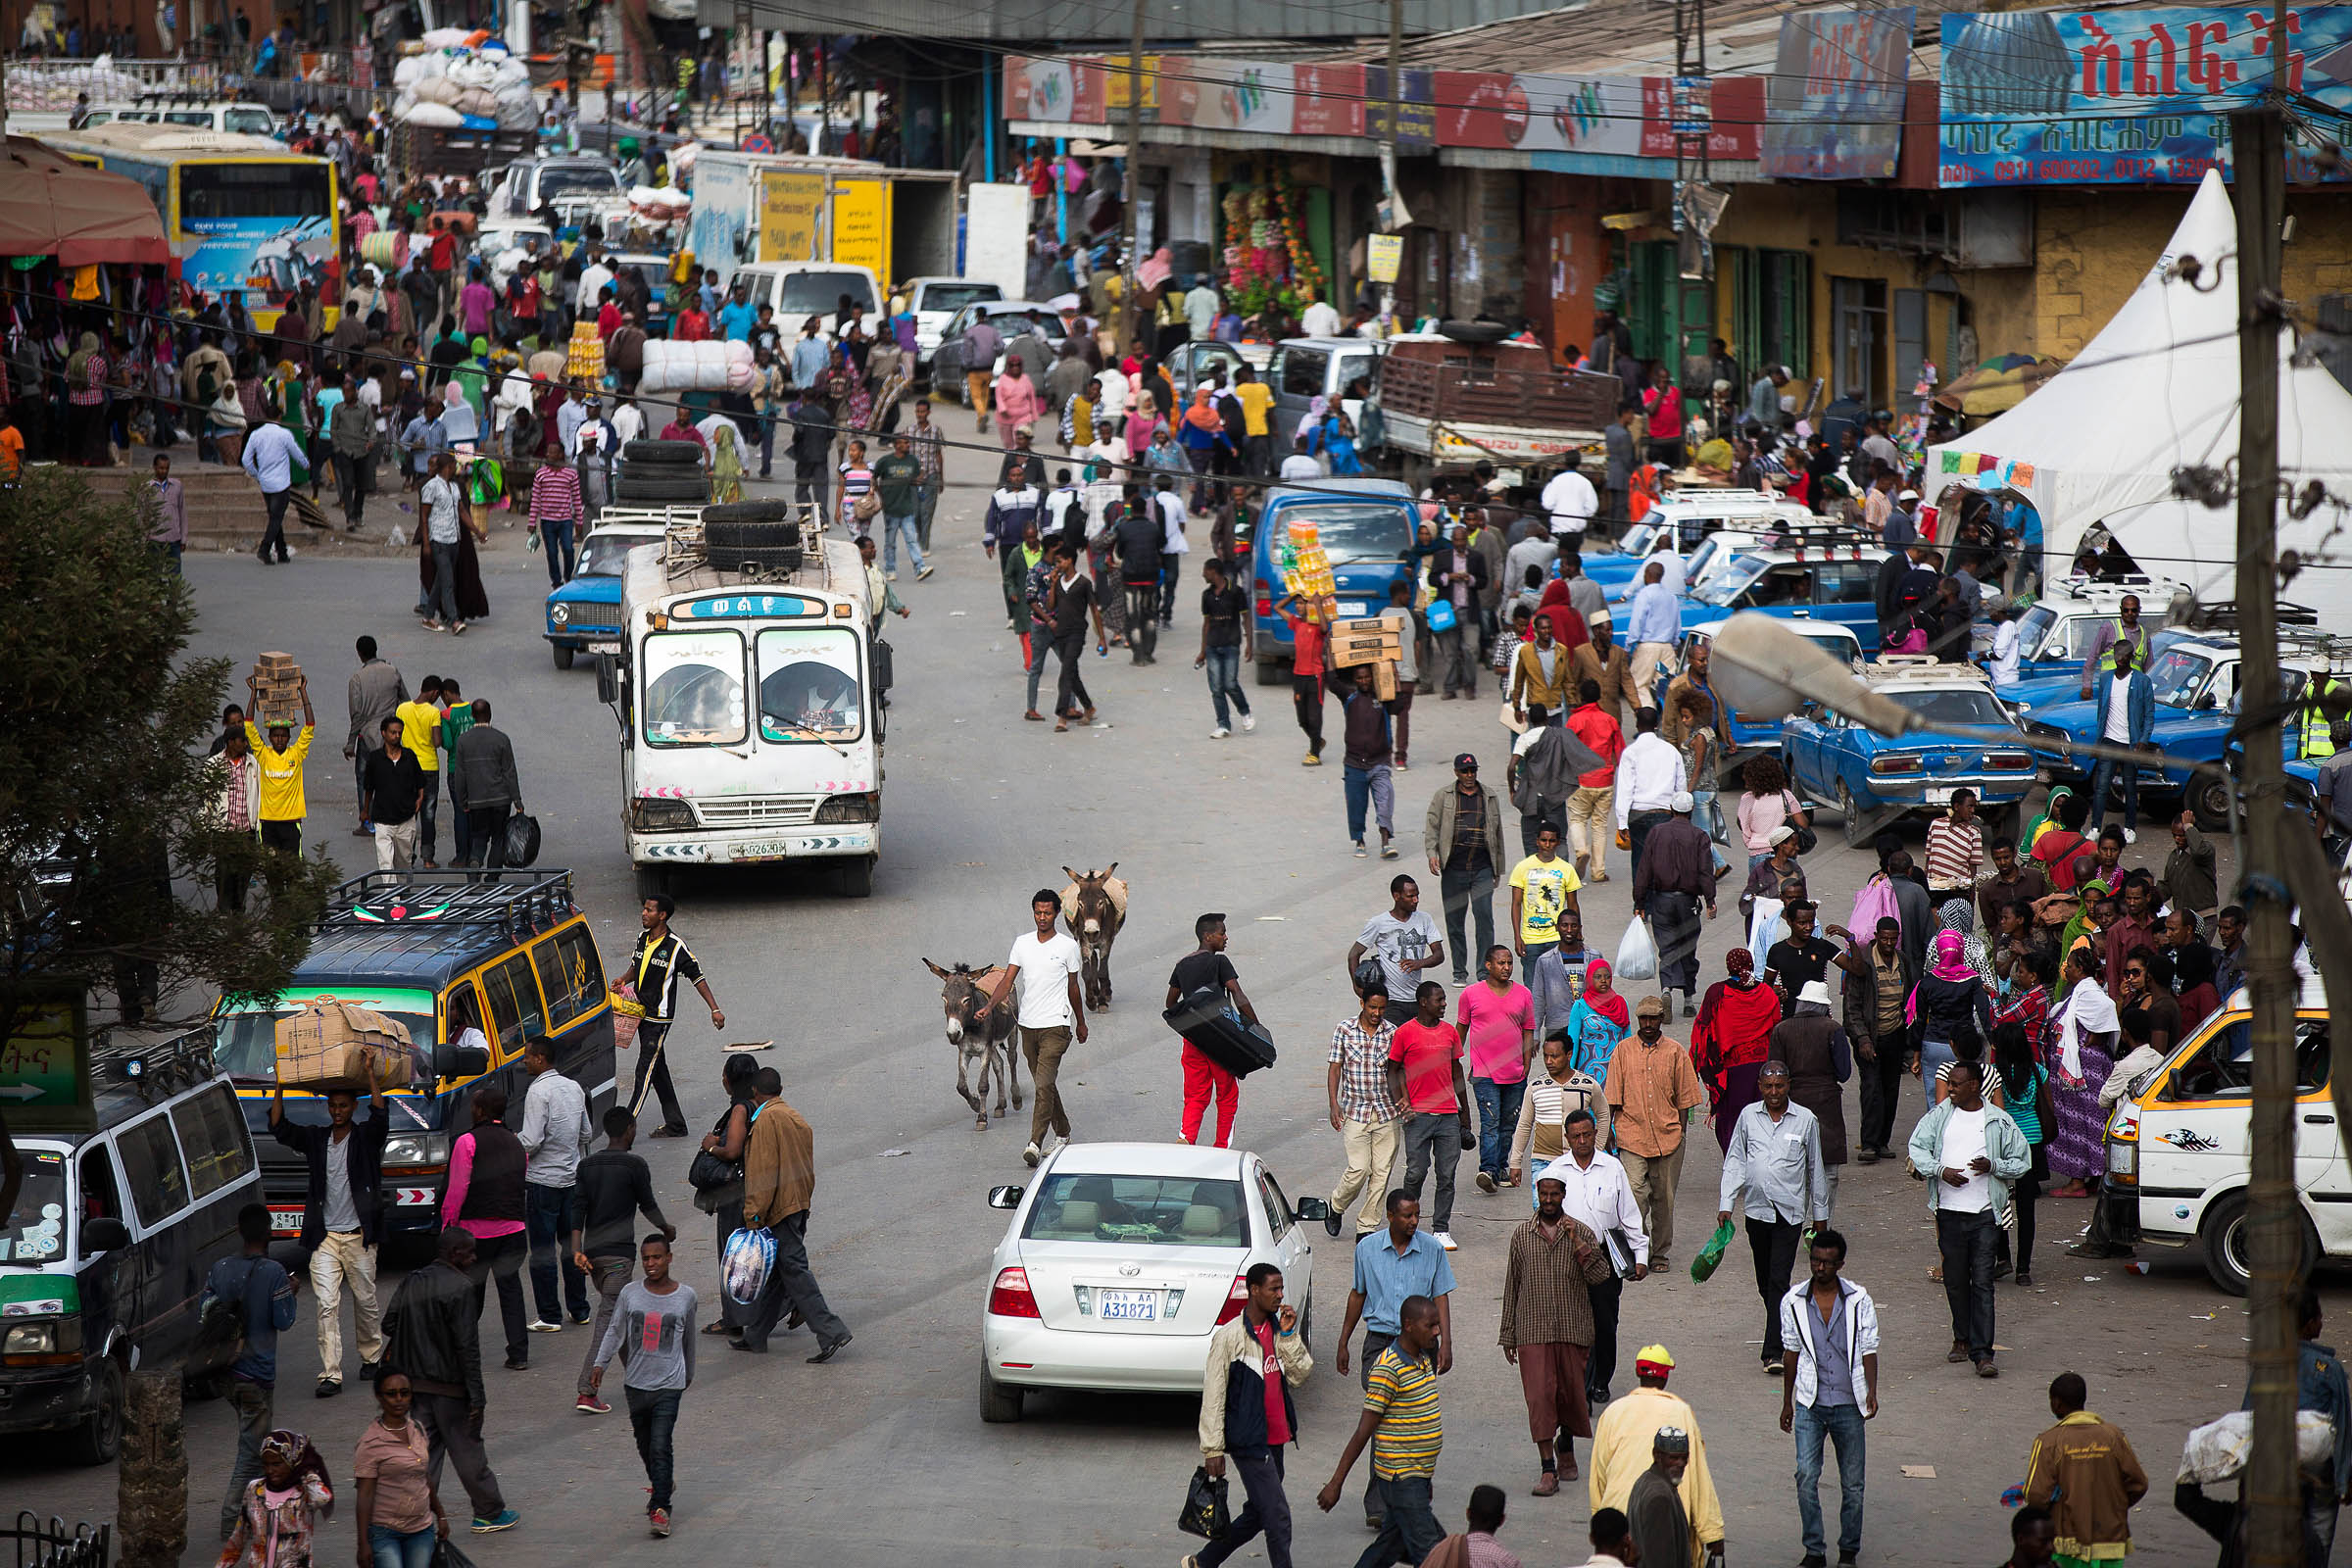 Many roads, like this one in Addis Ababa, have no sidewalks or street lights, and pedestrians are often forced to walk alongside motorized vehicles.